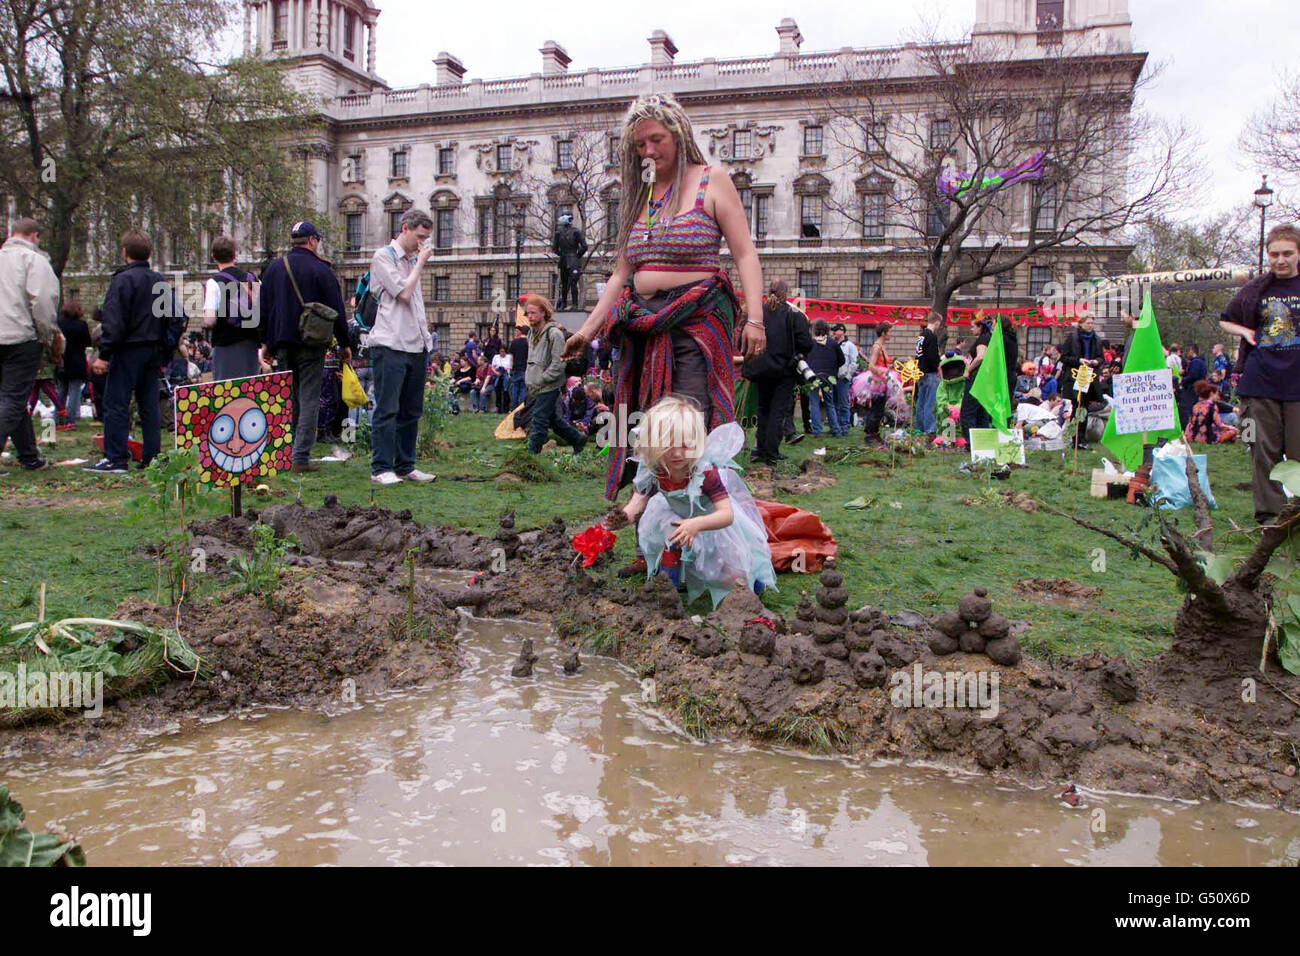 A pond dug in the centre of Parliament Square, in front of the Treasury. The focus of the day's anti-capitalism protests was a Guerrilla Gardening event organised by militant pressure group Reclaim the Streets to symbolise the reclaiming of urban spaces. * Organised groups dug up clumps of sodden turf, distributed wild fruit seeds, and dug the pond. Stock Photo